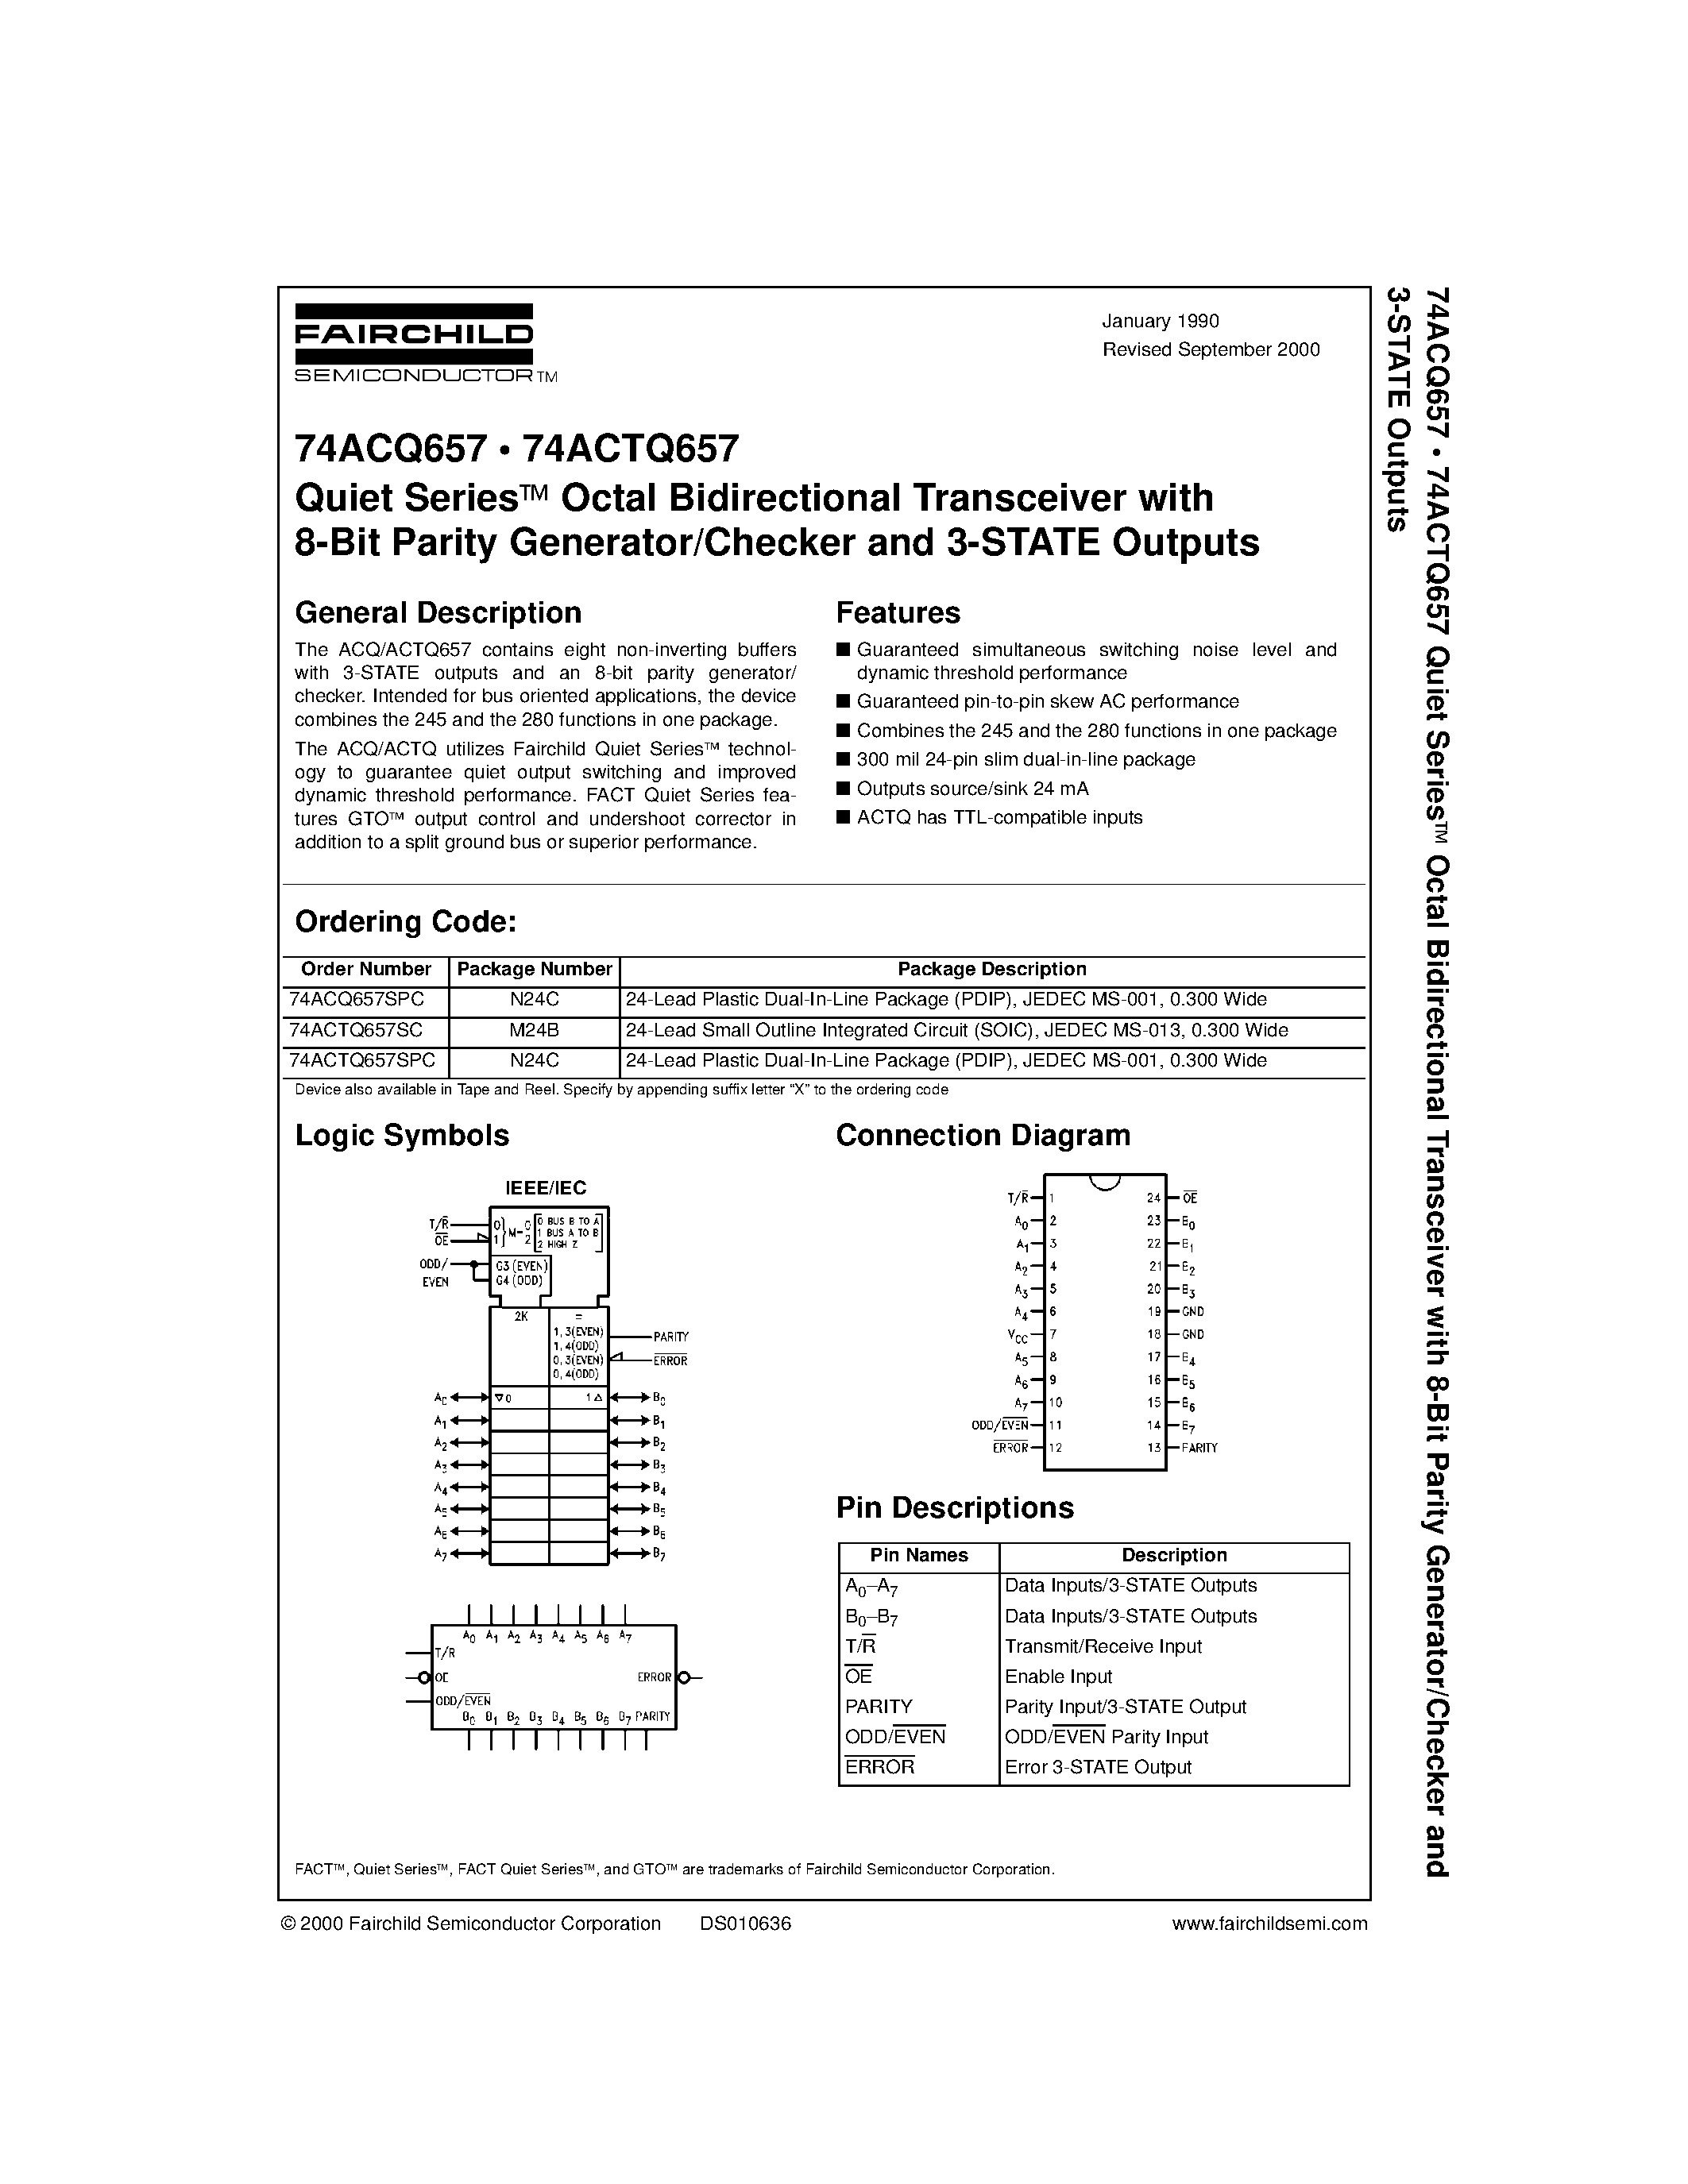 Datasheet 74ACTQ657SPC - Quiet Series Octal Bidirectional Transceiver with 8-Bit Parity Generator/Checker and 3-STATE Outputs page 1